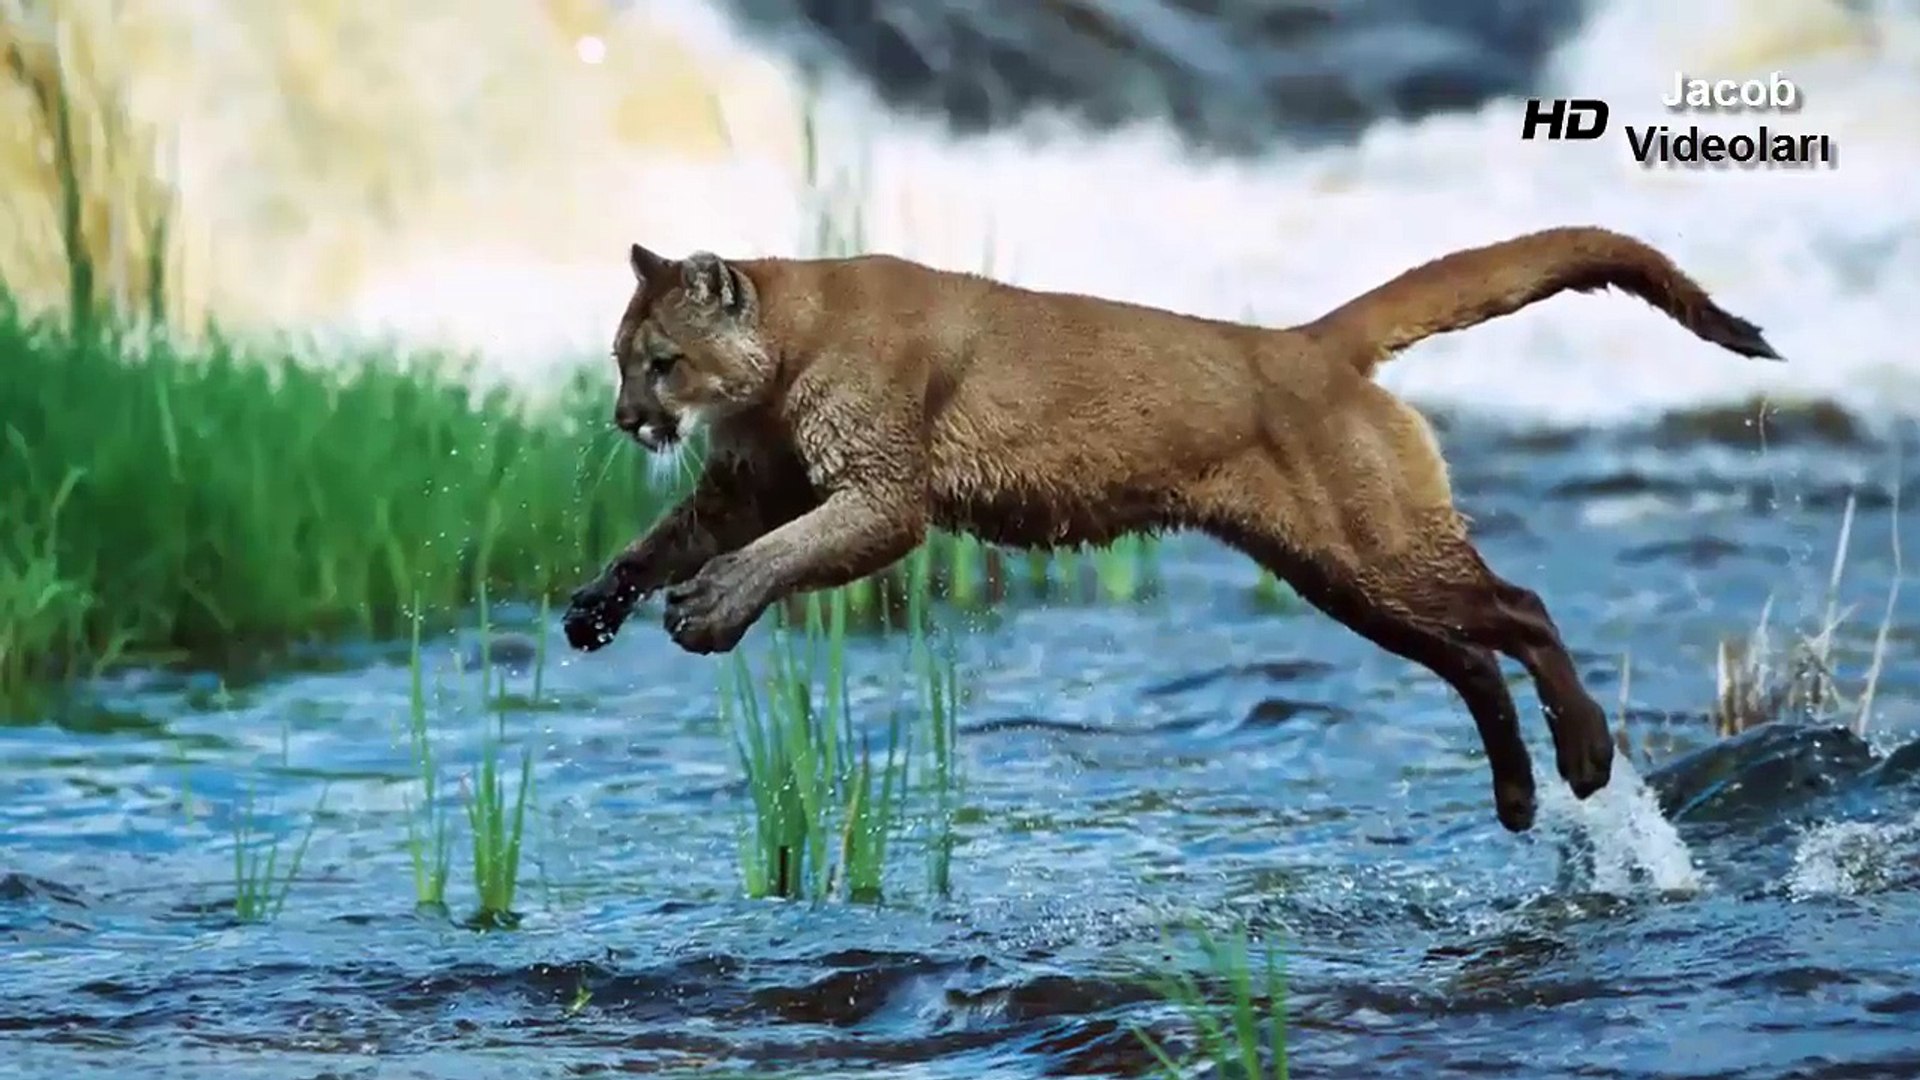 PUMA vs GRİZZLY BEAR ▻▻ Real Fight Cougar Mountain Lion Jaguar Crocodile  Caracal Animal At - video dailymotion